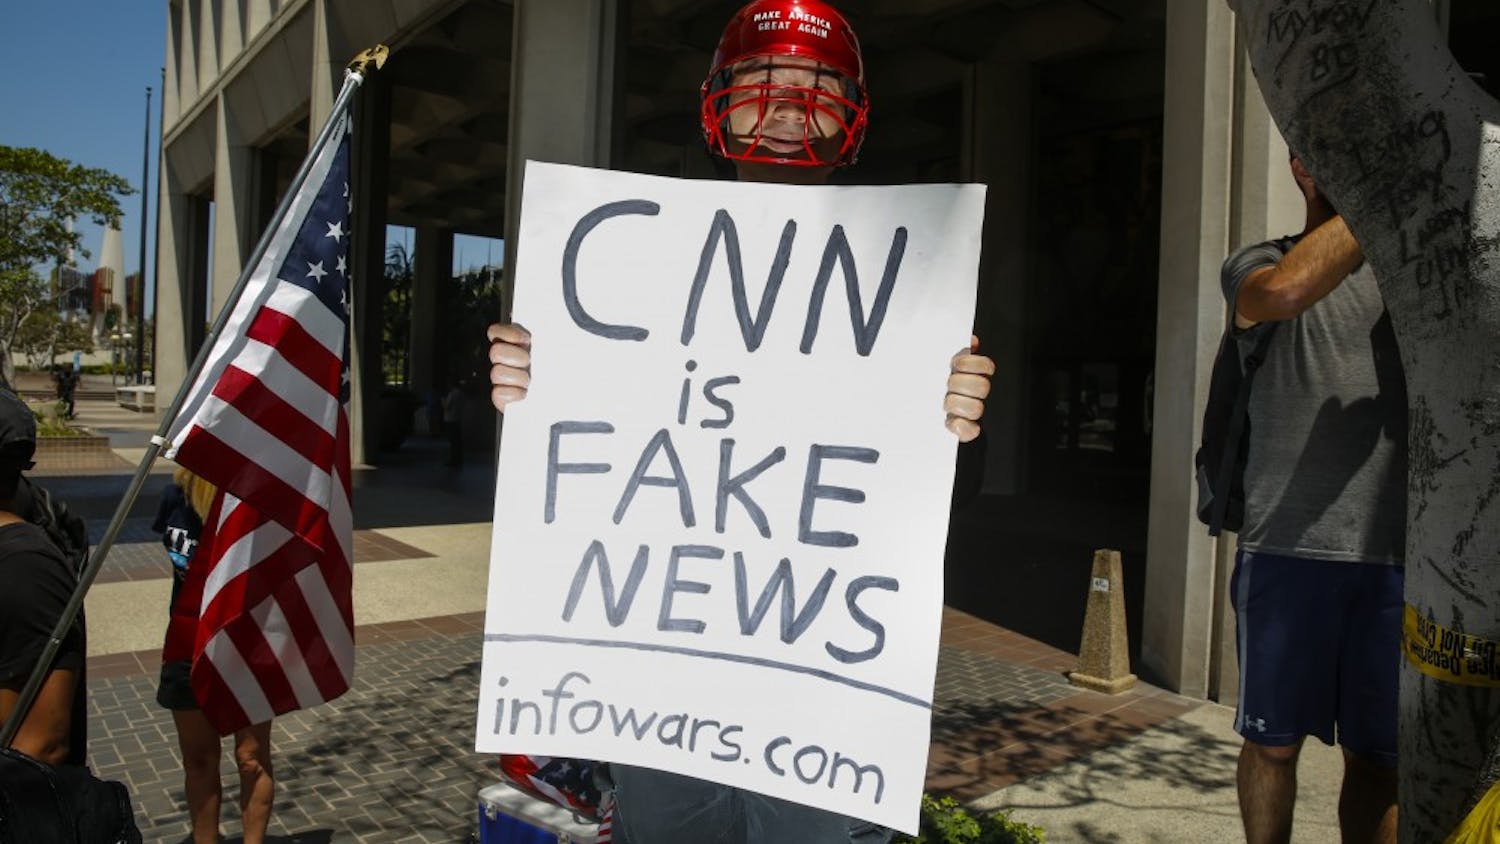 A man holding a sign that says, "CNN is Fake News" and "infowars.com" positioned himself into photos while the media covered an Impeachment March in downtown Los Angeles on July 2, 2017. (Jay L. Clendenin/Los Angeles Times/TNS)